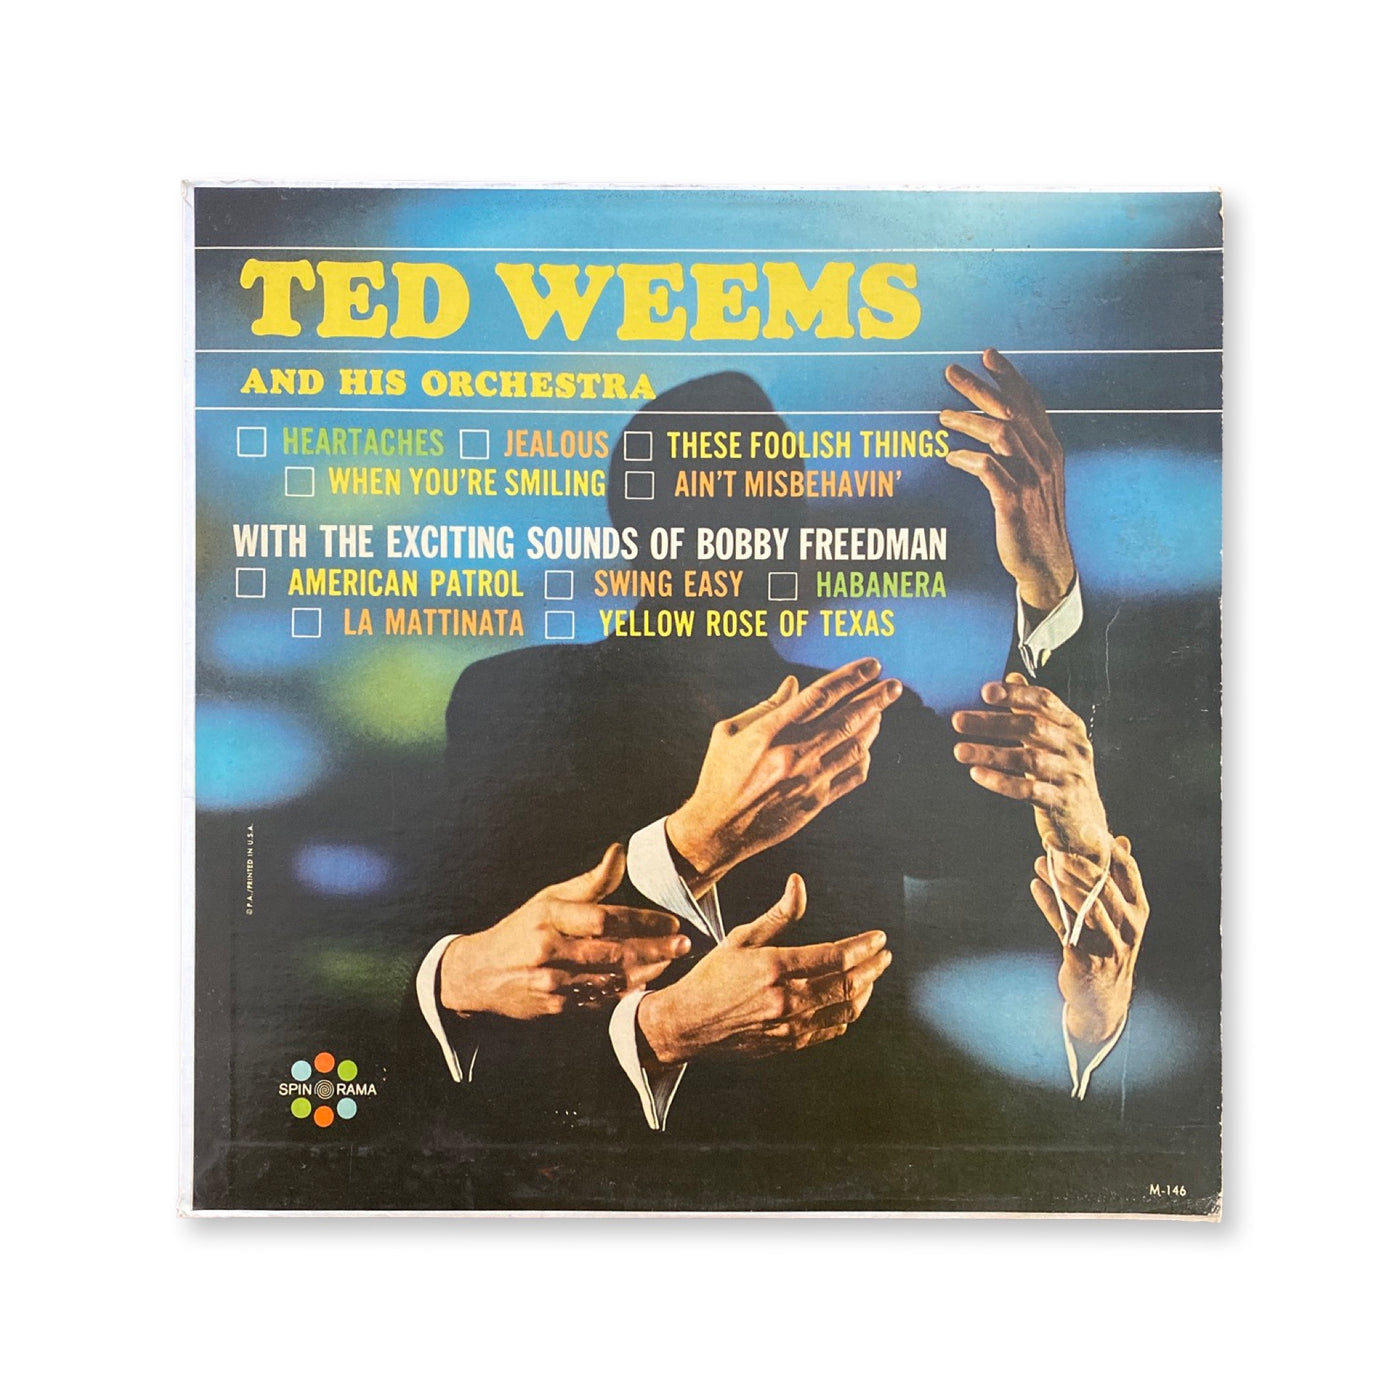 Ted Weems And His Orchestra - Ted Weems And His Orchestra With The Exciting Sounds Of Bobby Freedman